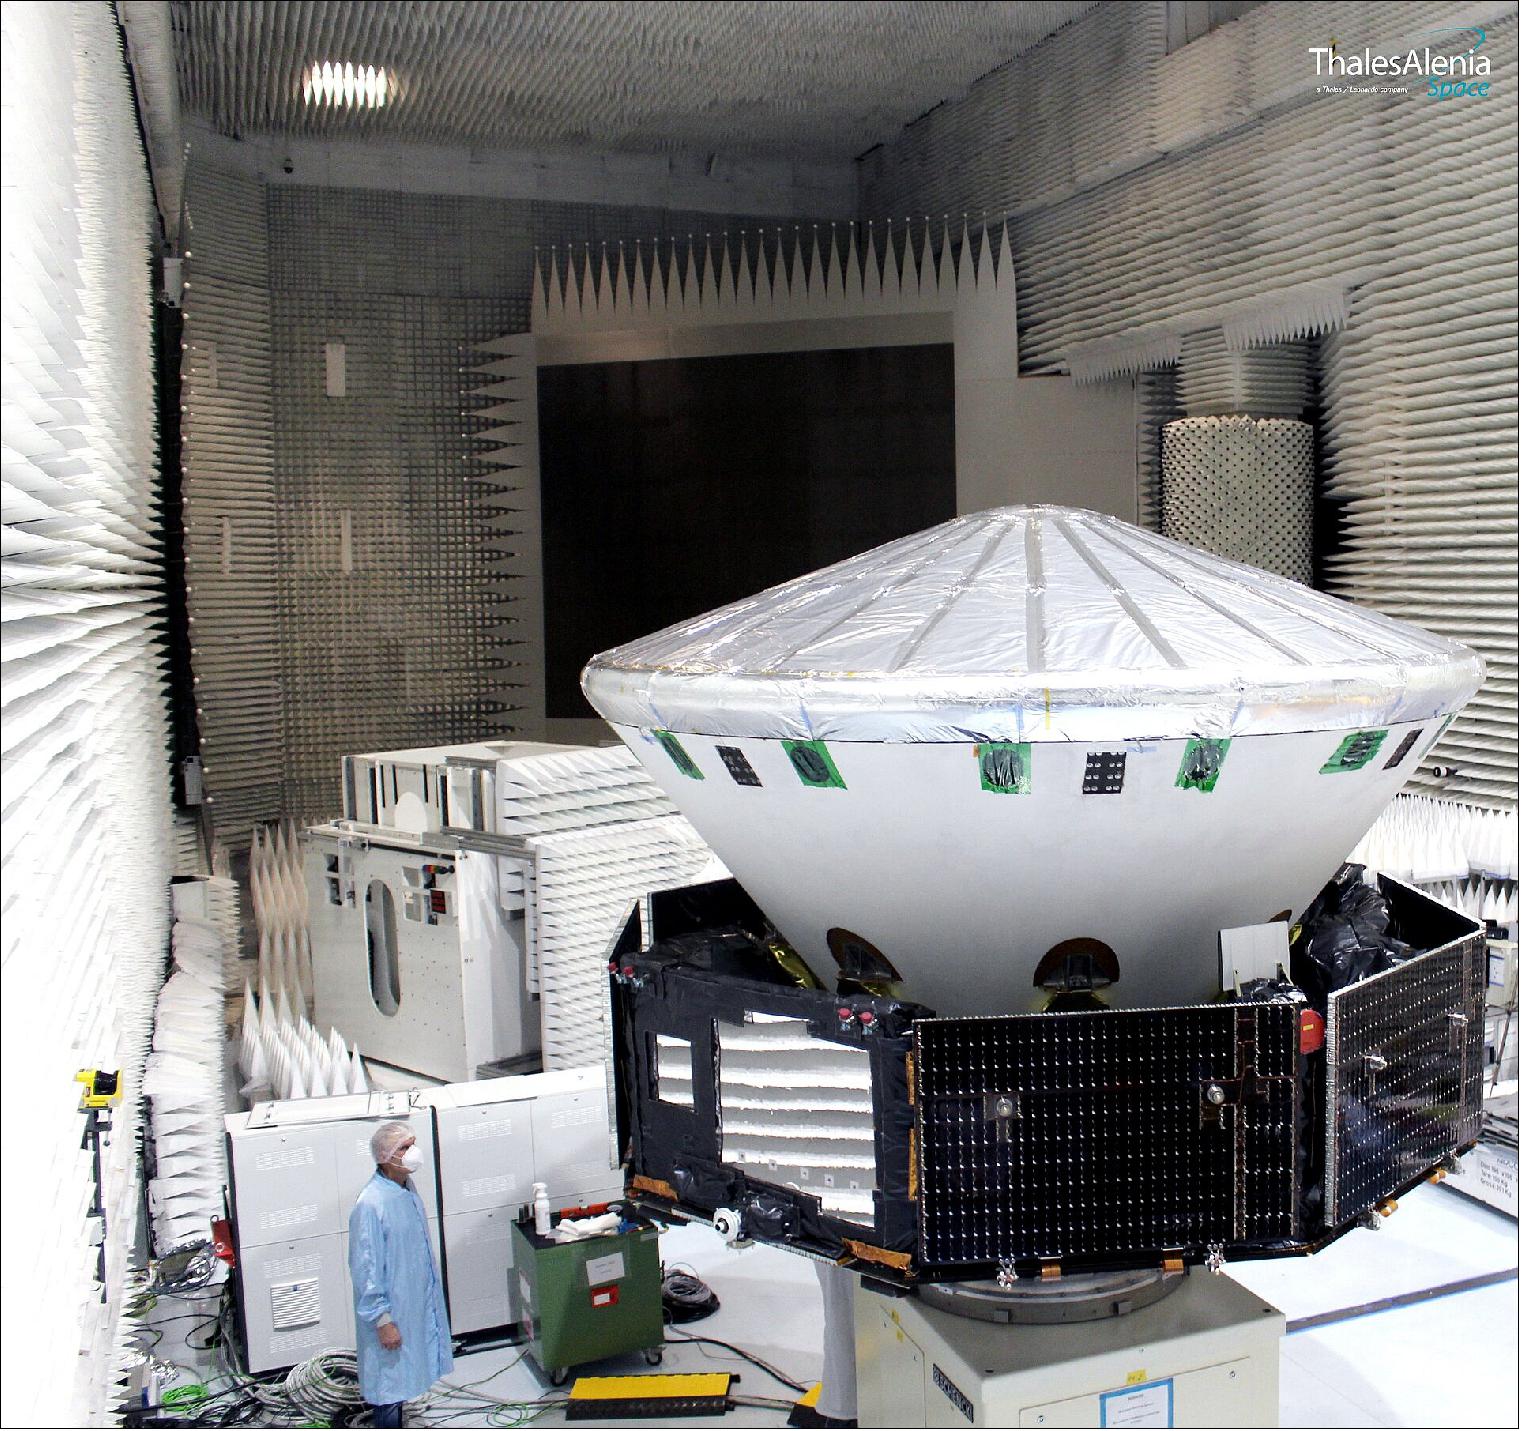 Figure 15: This image shows the complete spacecraft composite of the ExoMars 2022 mission in an anechoic chamber at Thales Alenia Space’s facilities in Cannes, France. The spacecraft comprises the carrier module (the eight sided structure), the descent module (the white module in the centre) and the Rosalind Franklin rover and Kazachok surface platform, which are encapsulated inside the descent module. The person to the left of the image gives a sense of scale. This image was captured during a dynamic balancing test of the actual flight modules that will fly to Mars – an activity to ensure the spacecraft is perfectly balanced when spinning in space (image credit: Thales Alenia Space)